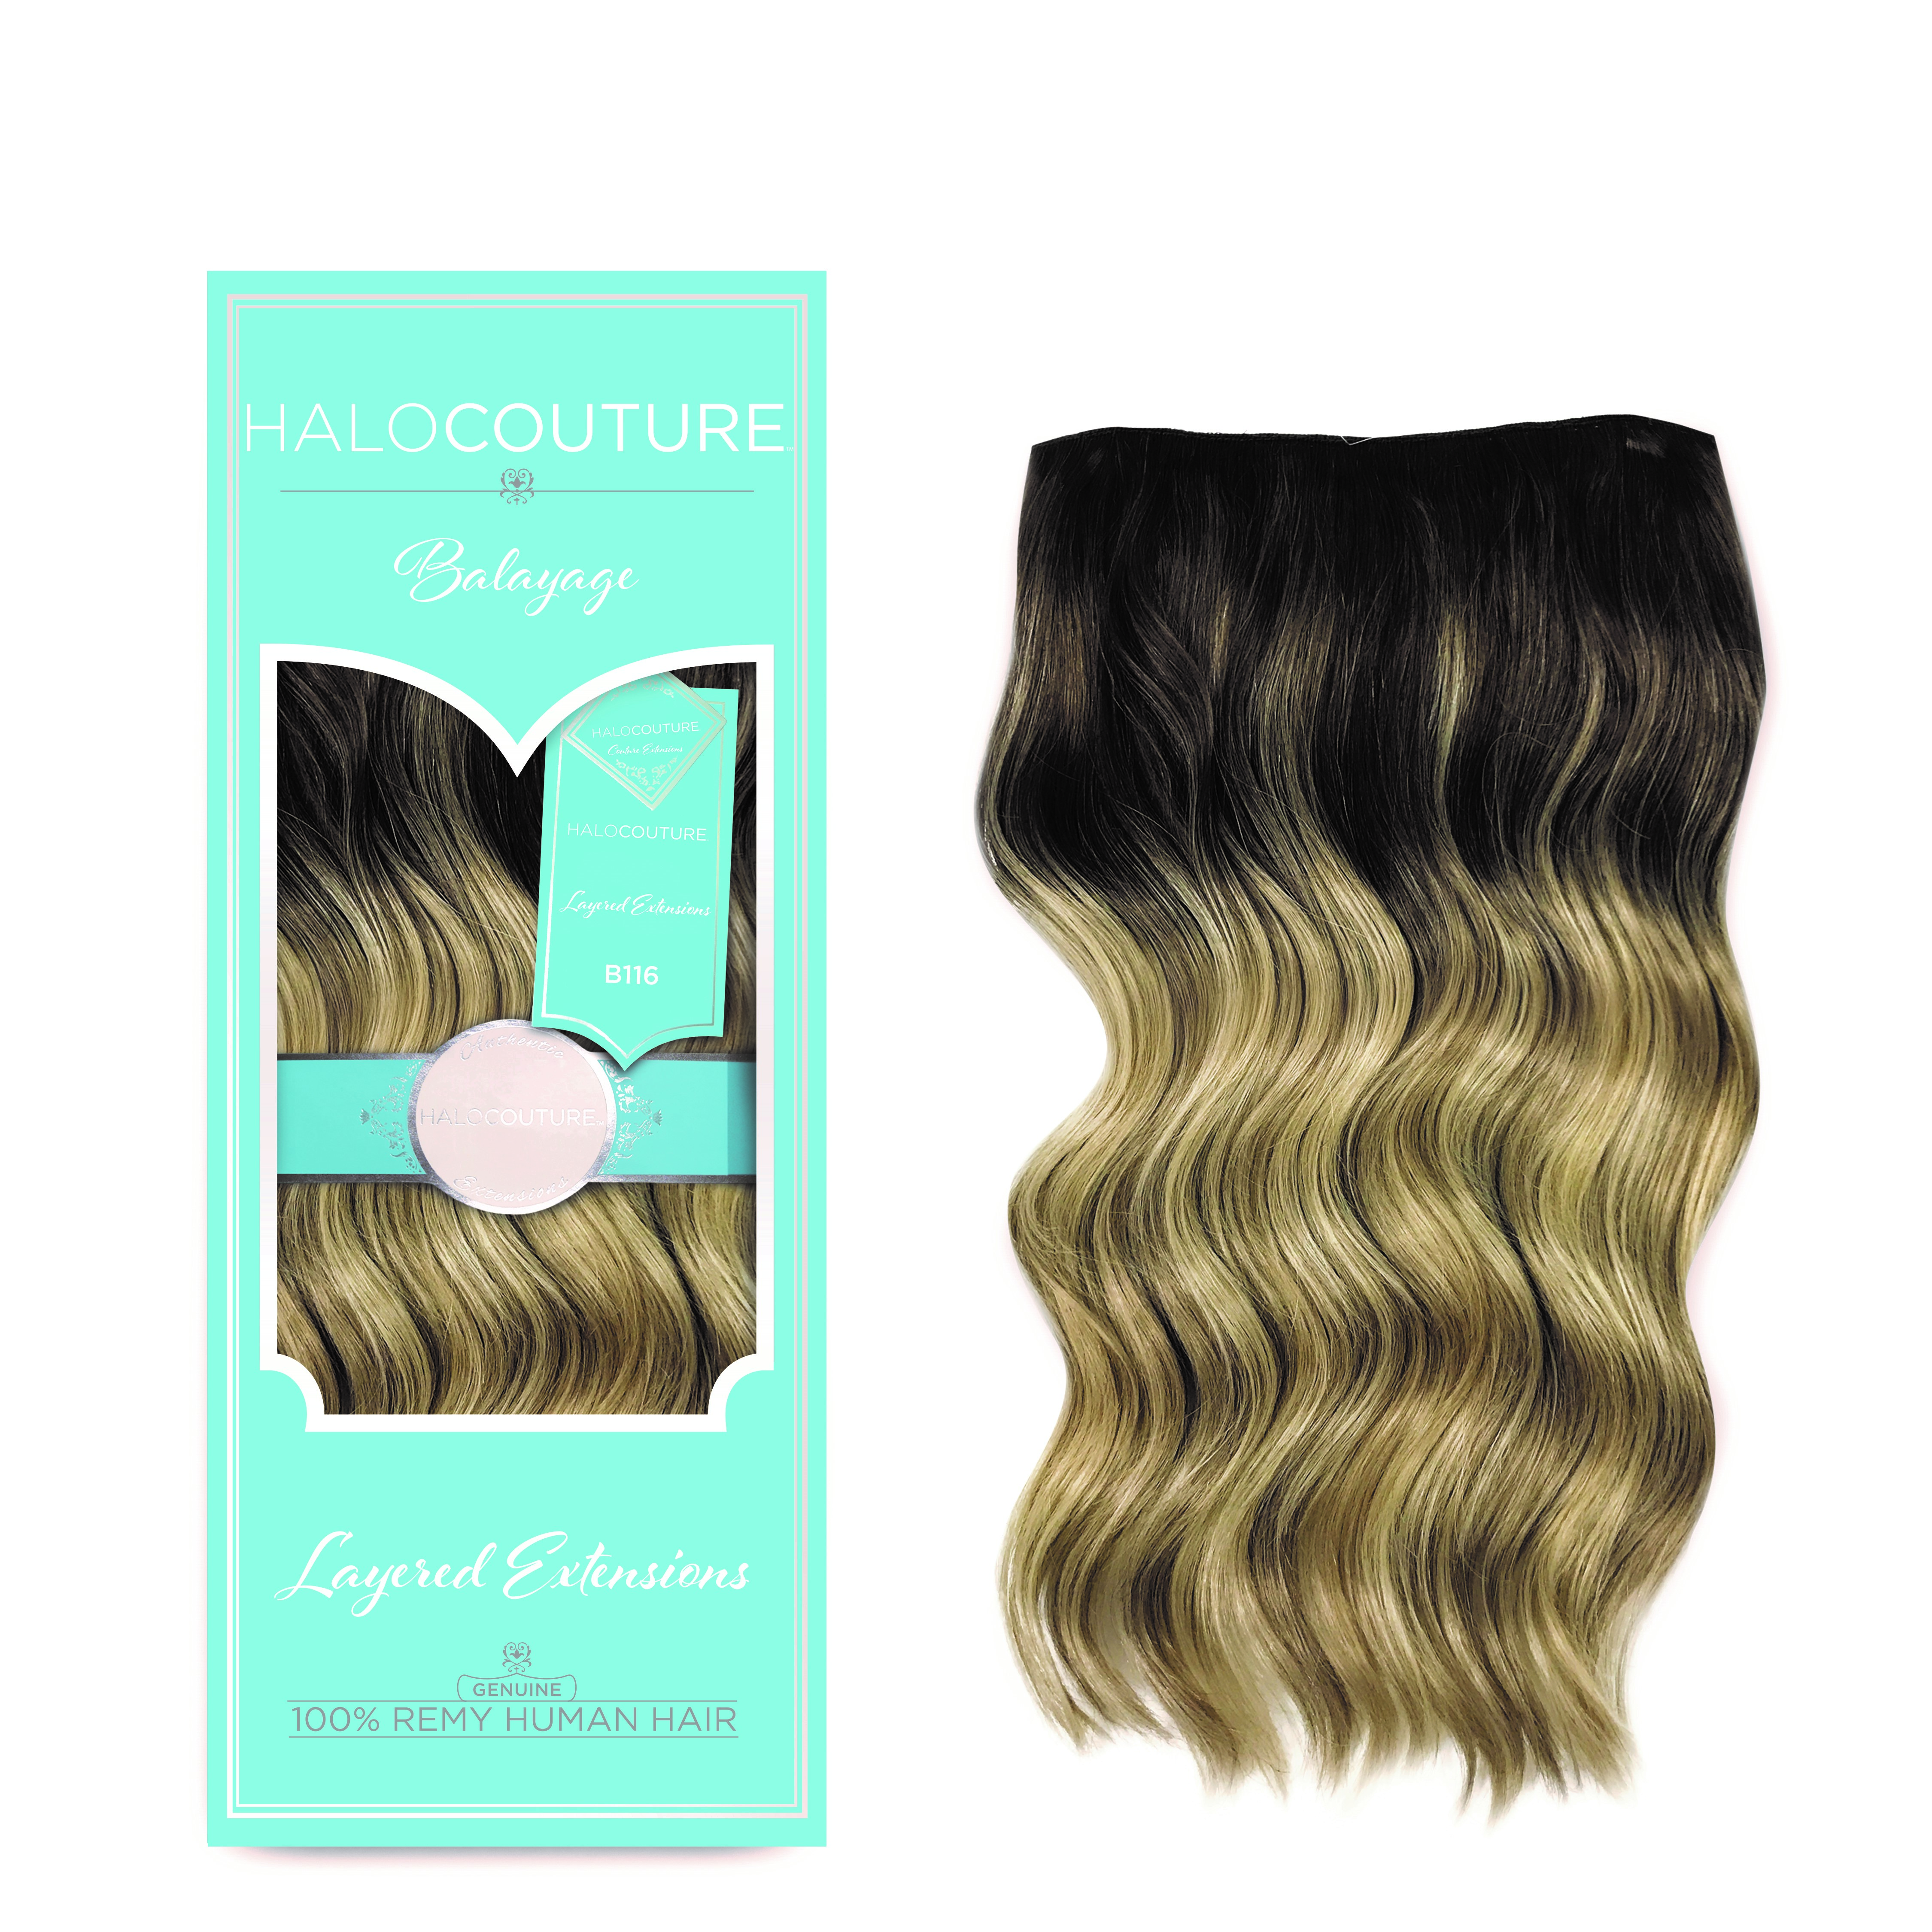 Wigs by HaloCouture Baylayage Layered Halo Packaging